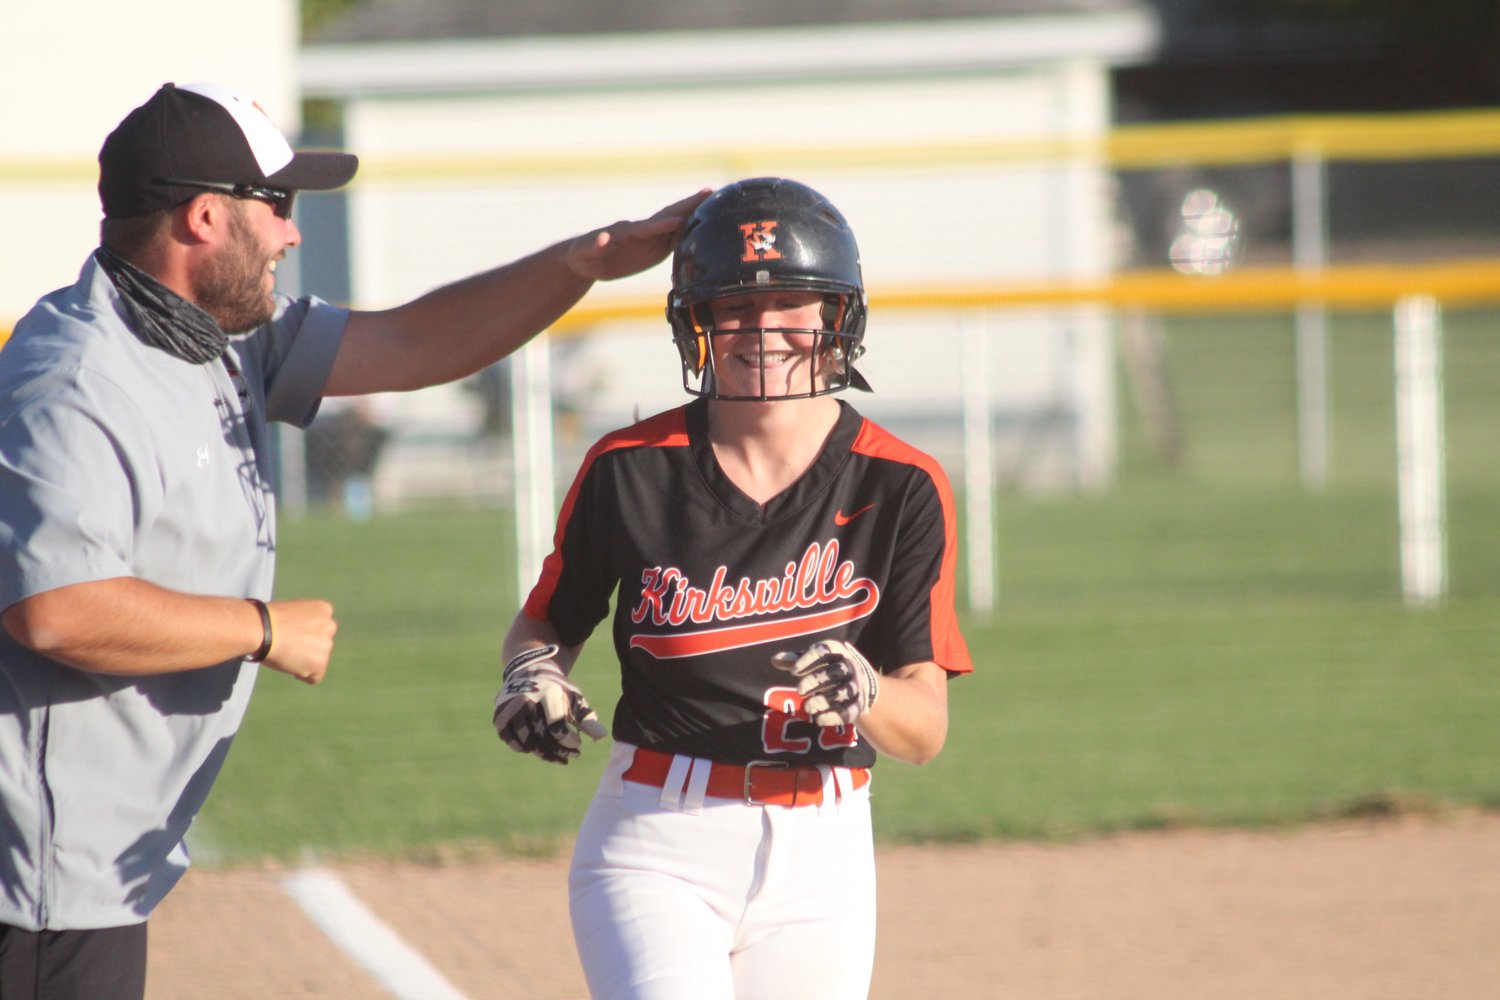 Kirksville catcher Madi McCarty smiles and gets a pat on the helmet from coach Derek Allen after hitting a home run Tuesday against Hannibal.